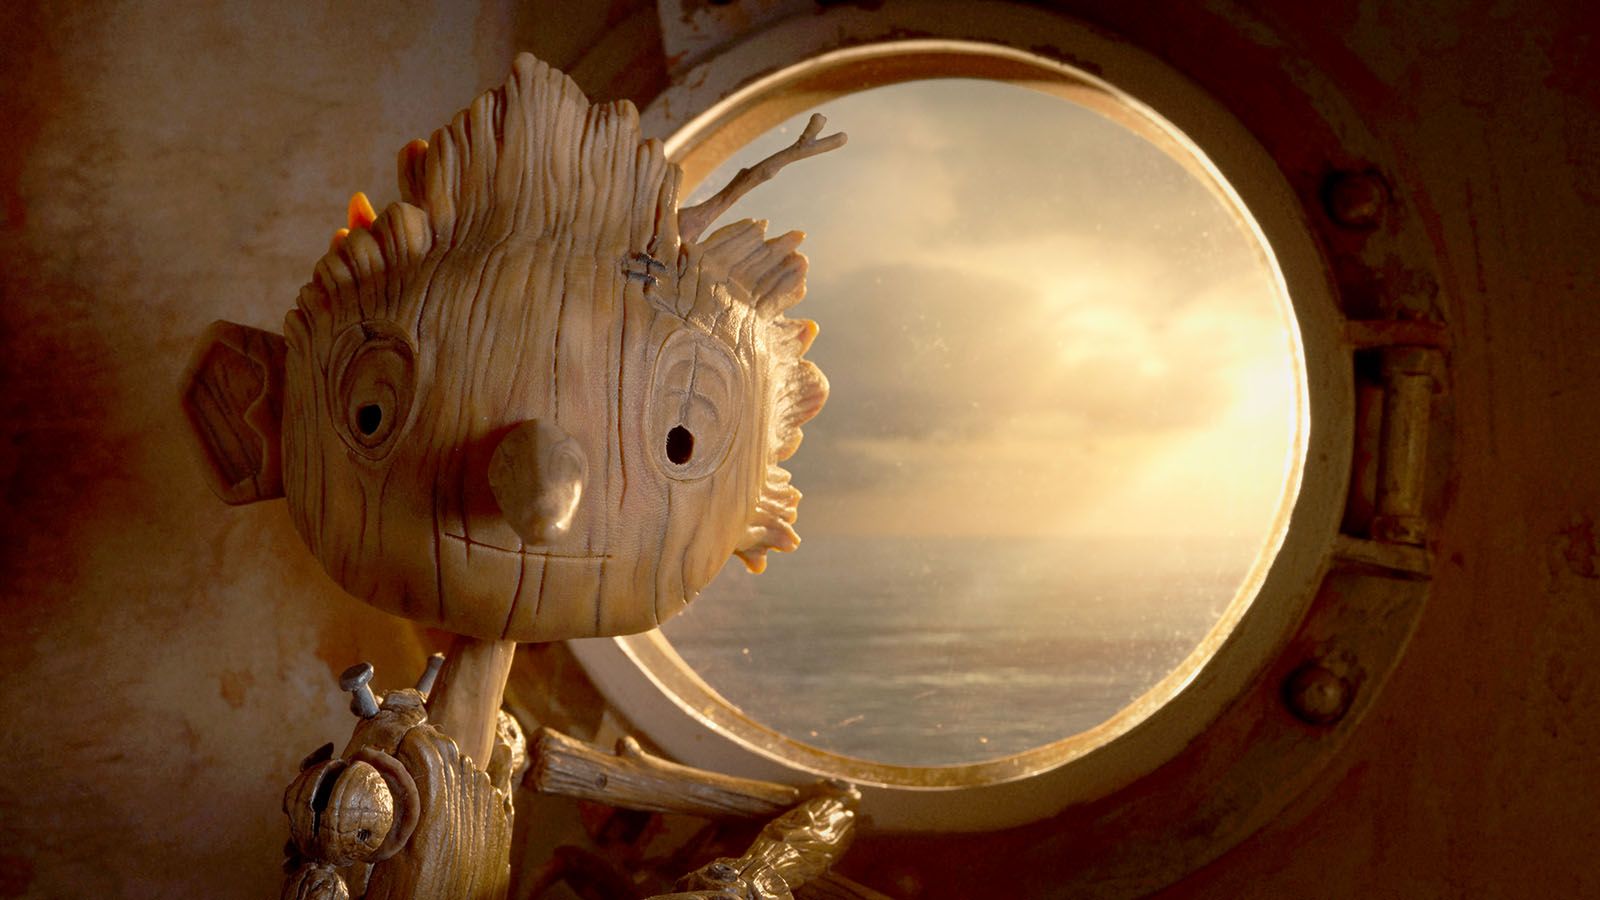 Guillermo del Toro offers his own take on the story of Pinocchio.